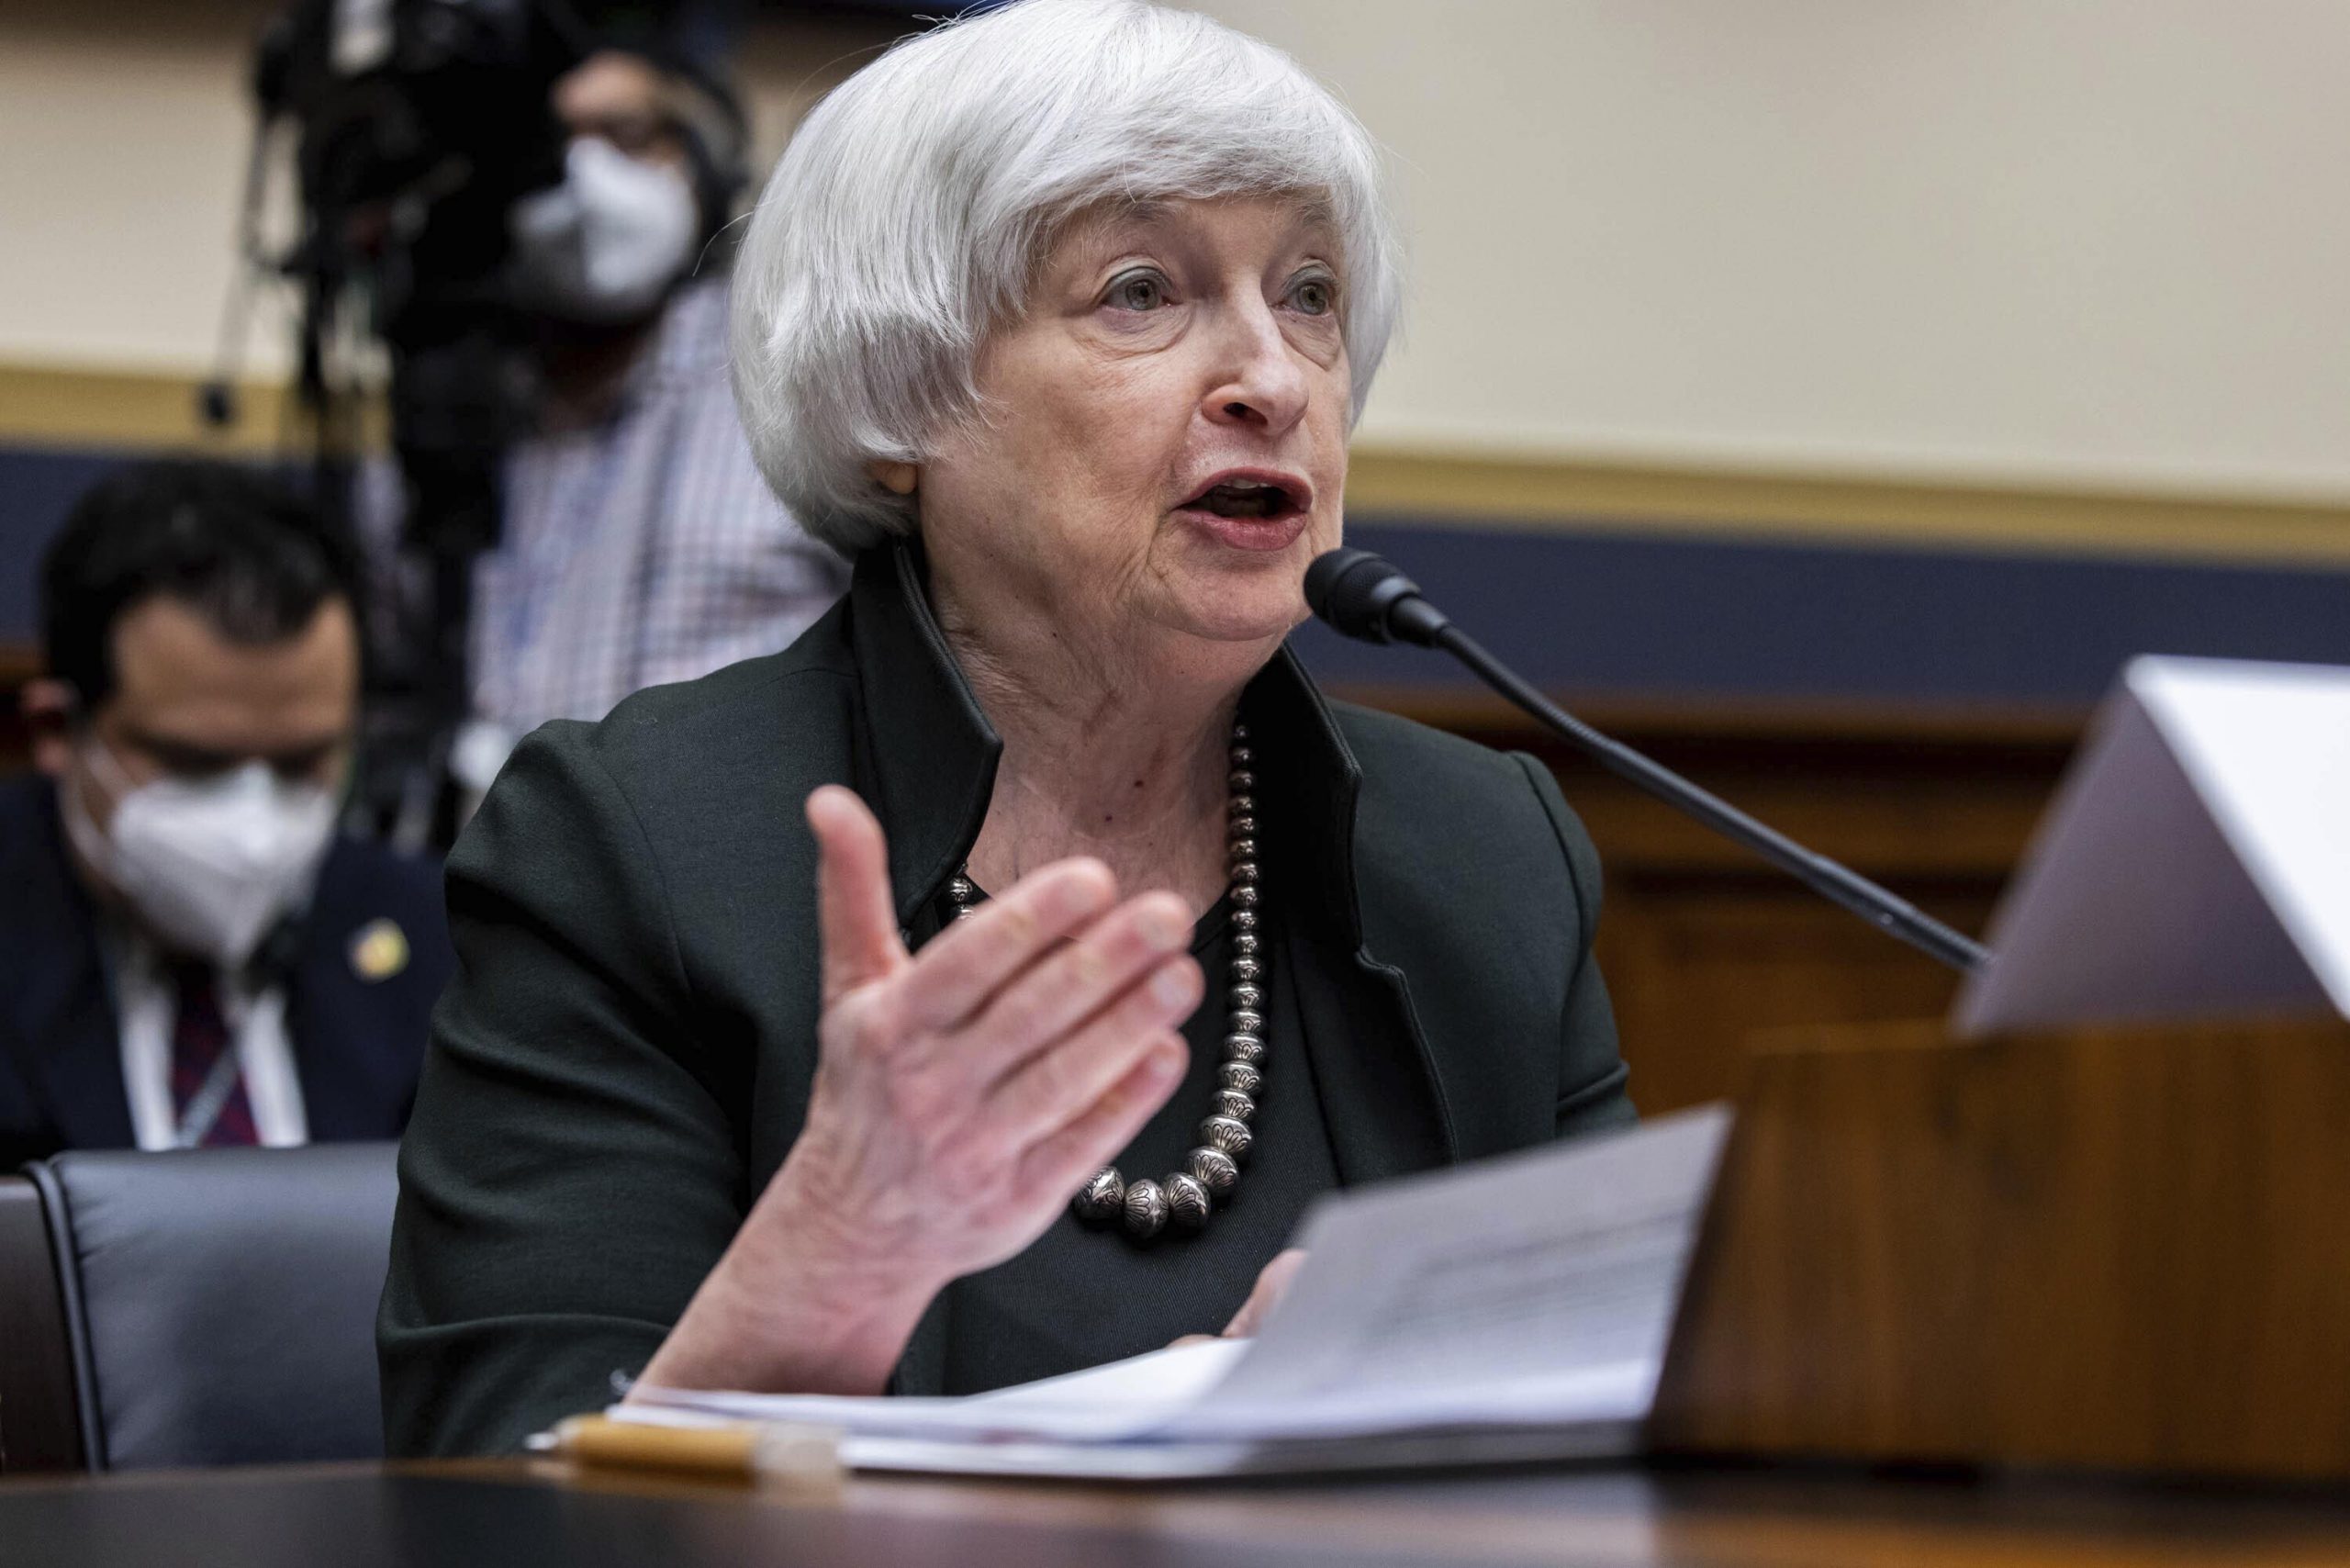 Crypto meltdown prompts Yellen to call for new regulation